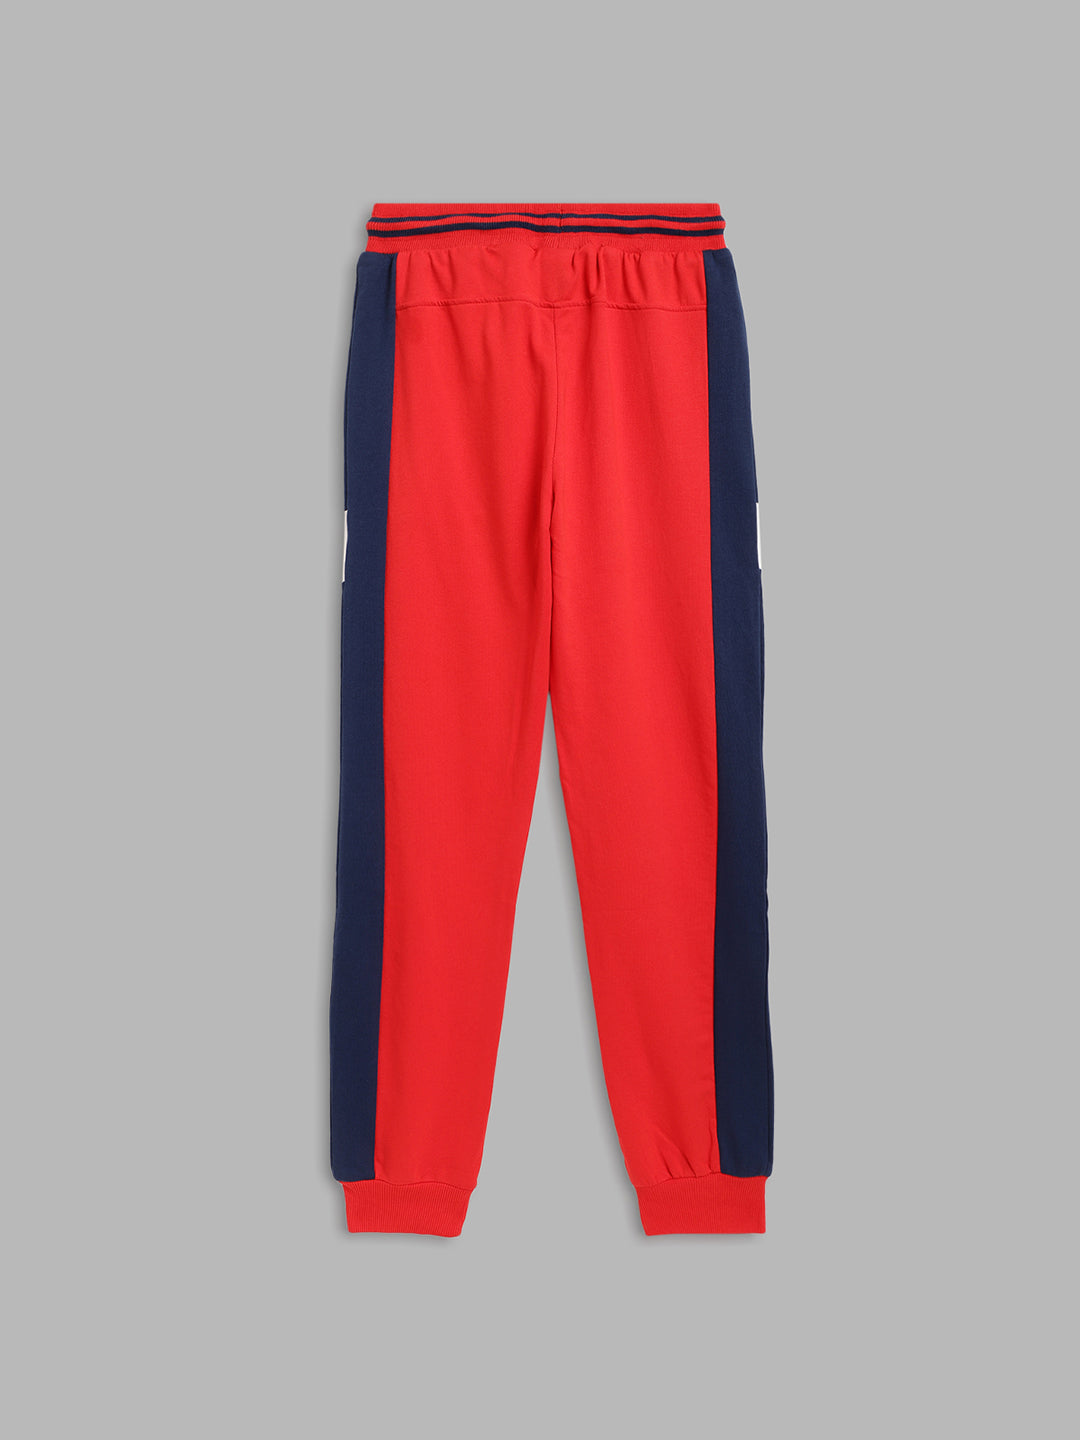 Buy Blue Track Pants for Boys by Superman Online | Ajio.com